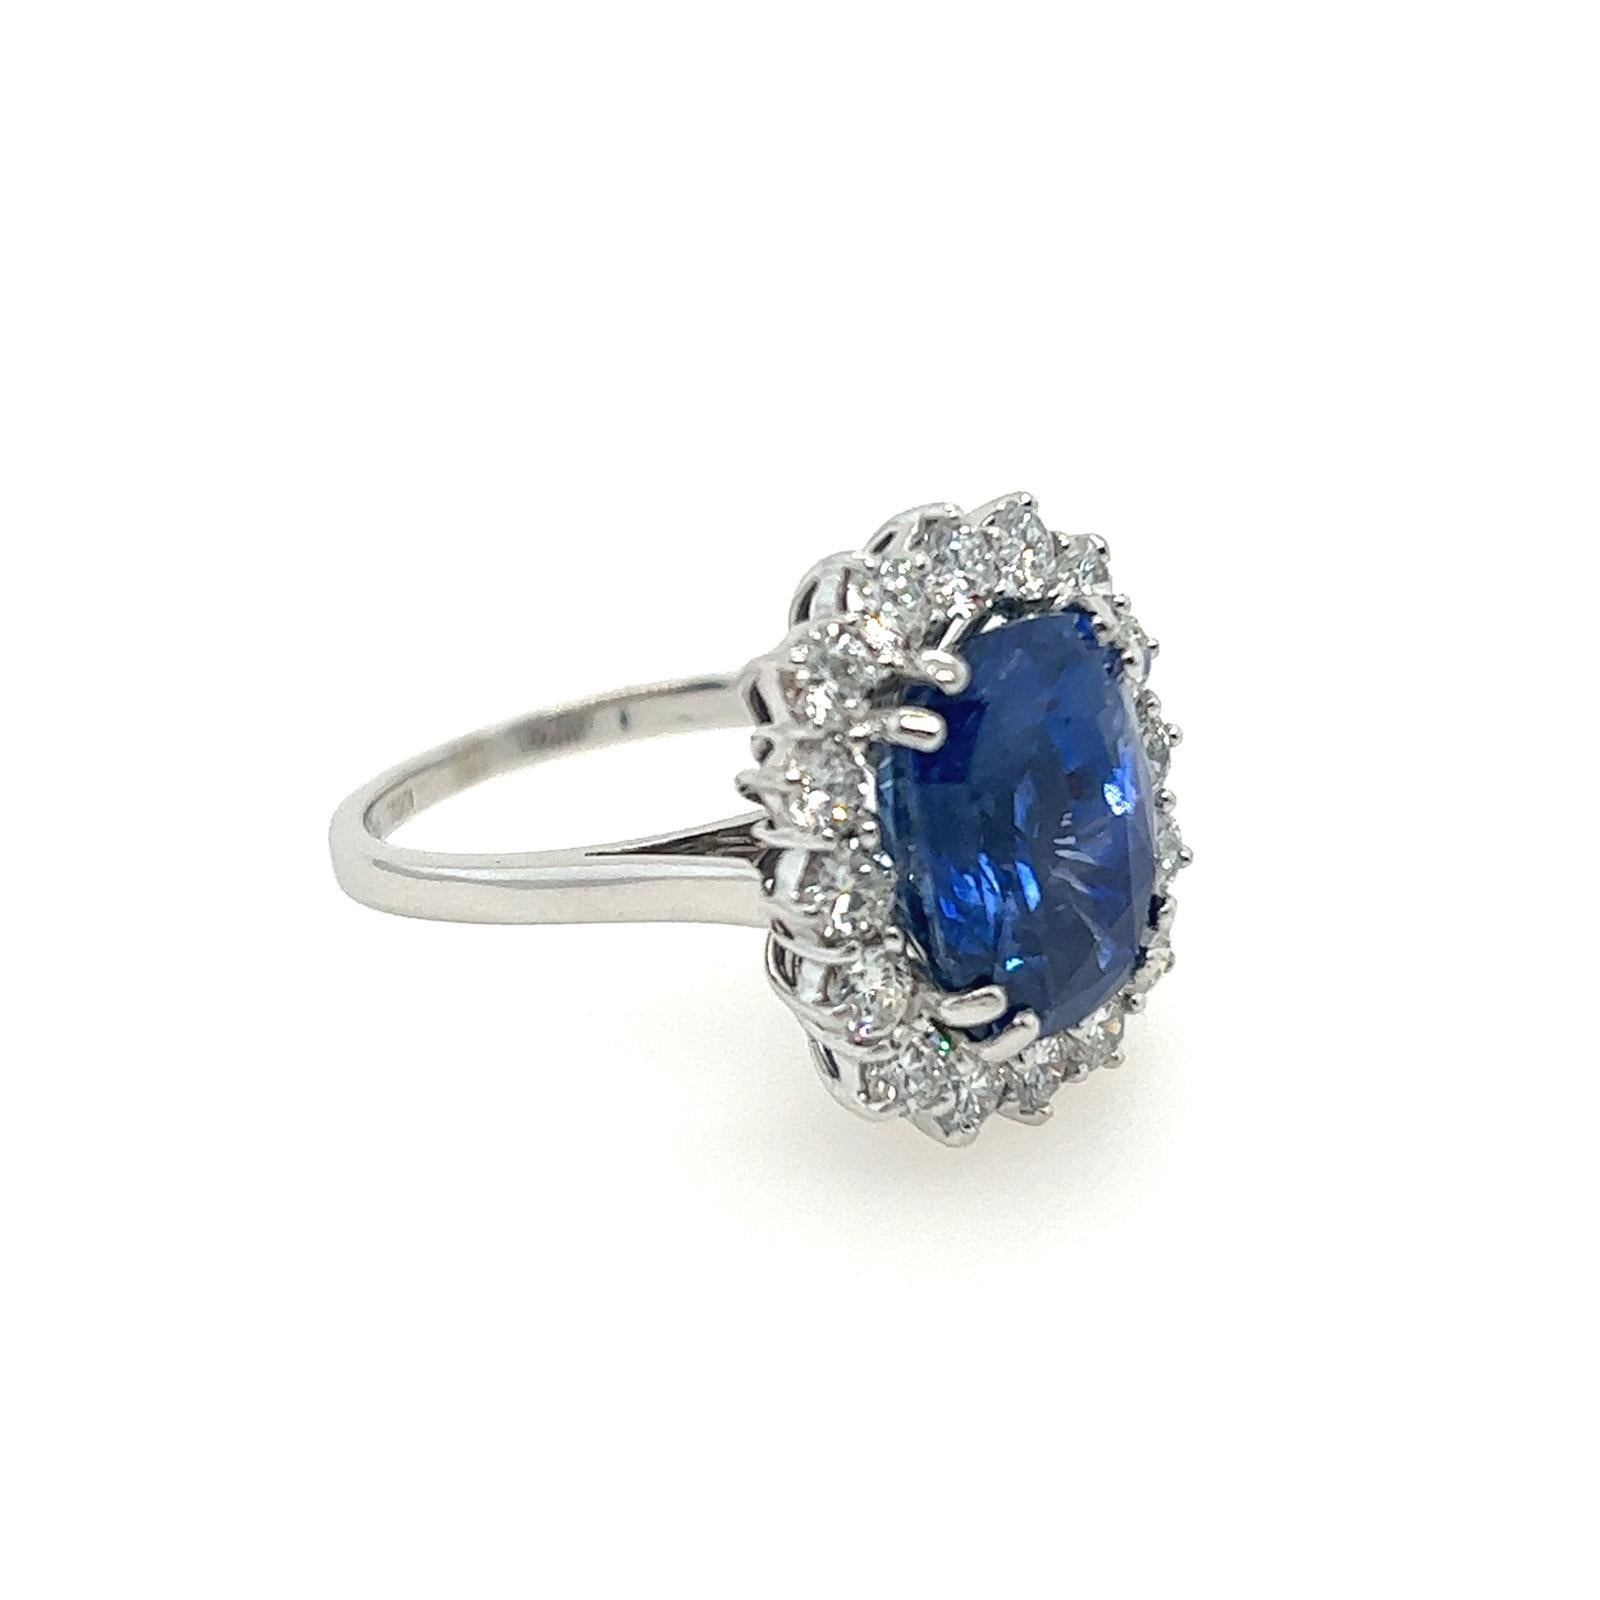 GCS Certified 8.57 Carat Ceylon Sapphire and Diamond Cluster Ring in 18K White Gold.

This magnificent masterpiece features a majestic Cushion cut GCS Certified Blue Sapphire at its centre. Weighing 8.57 Carats, this spectacular stone originates